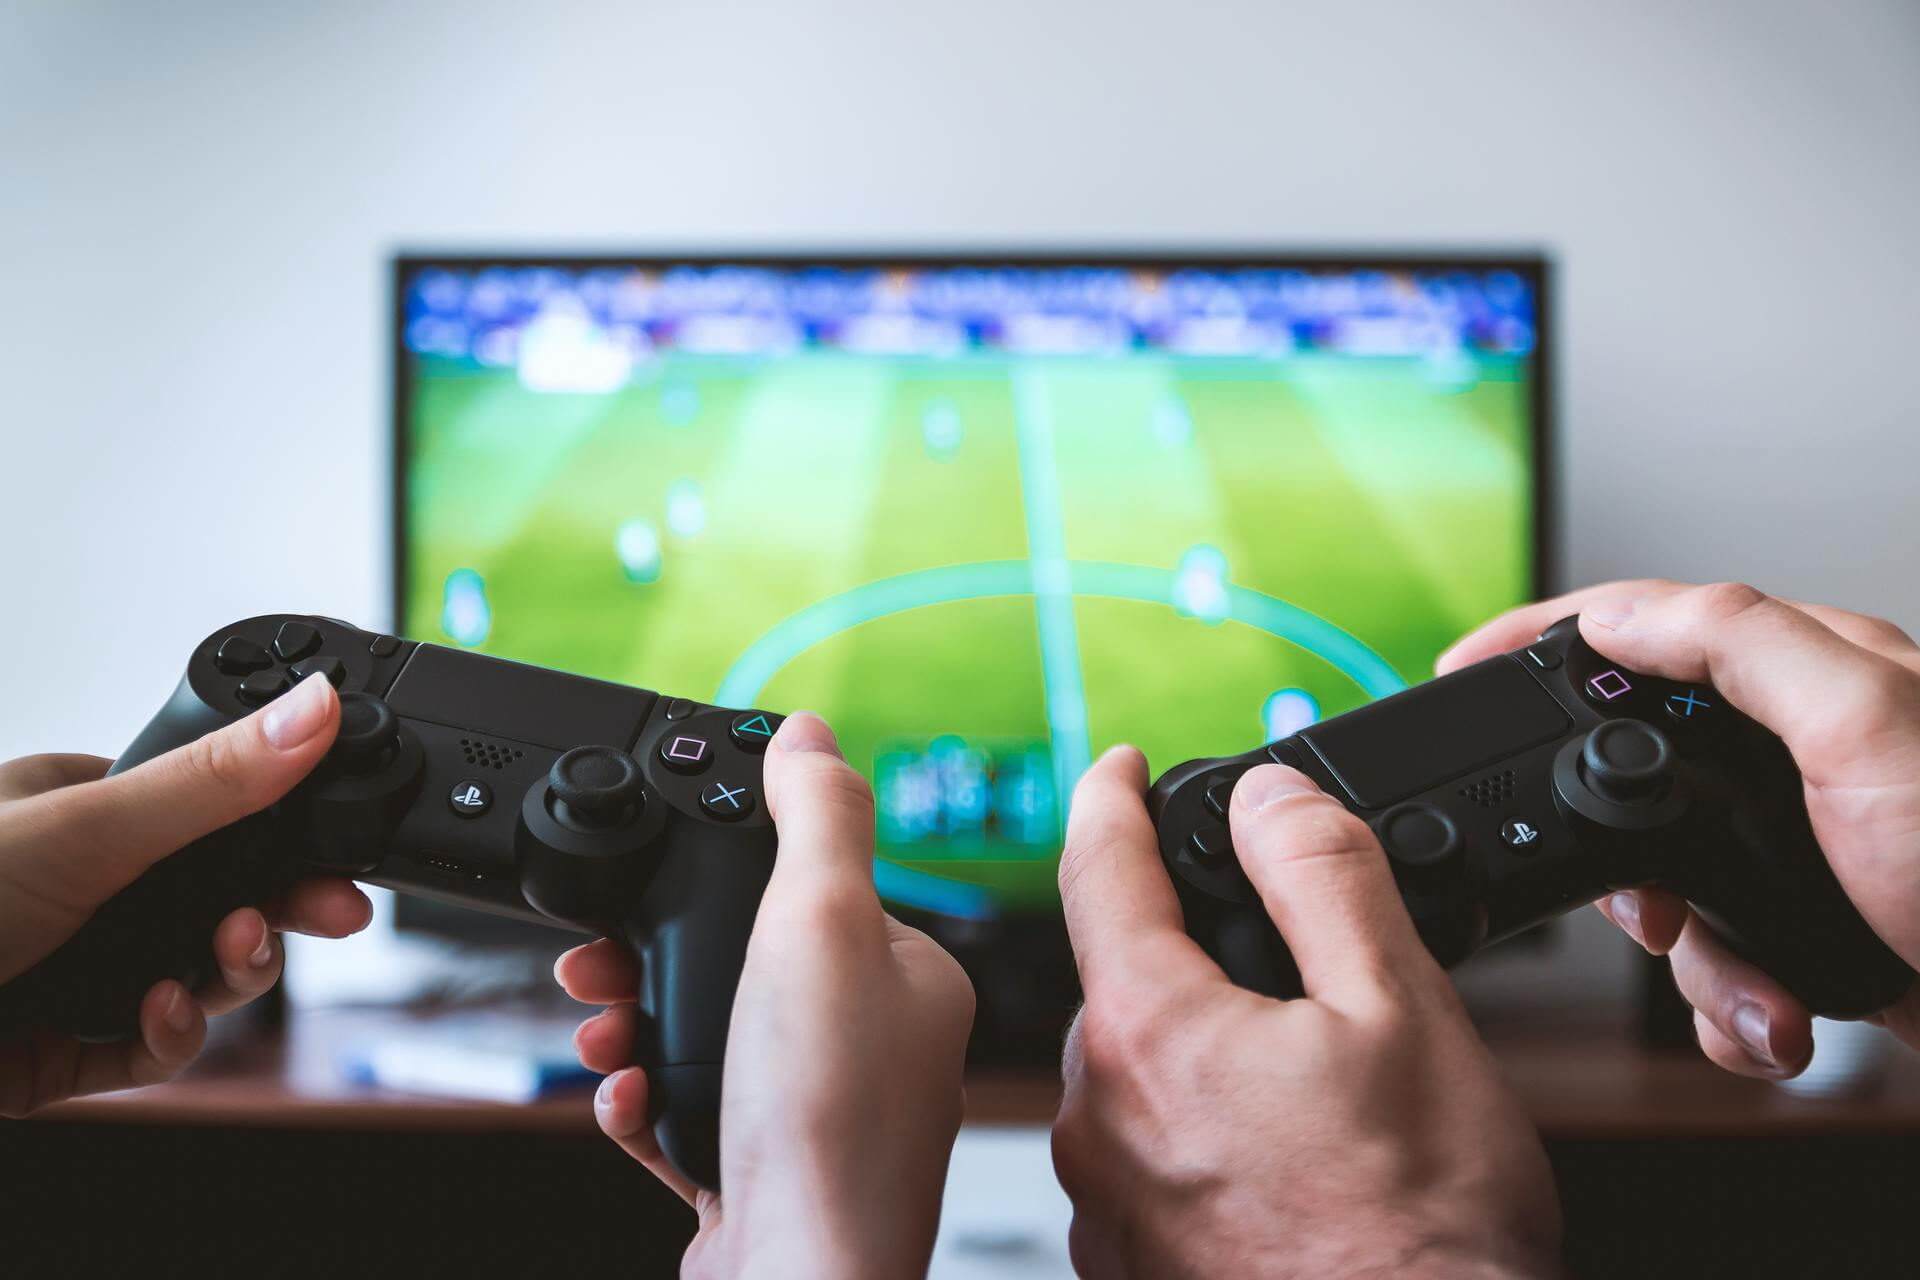 8 two-player online games to challenge a friend